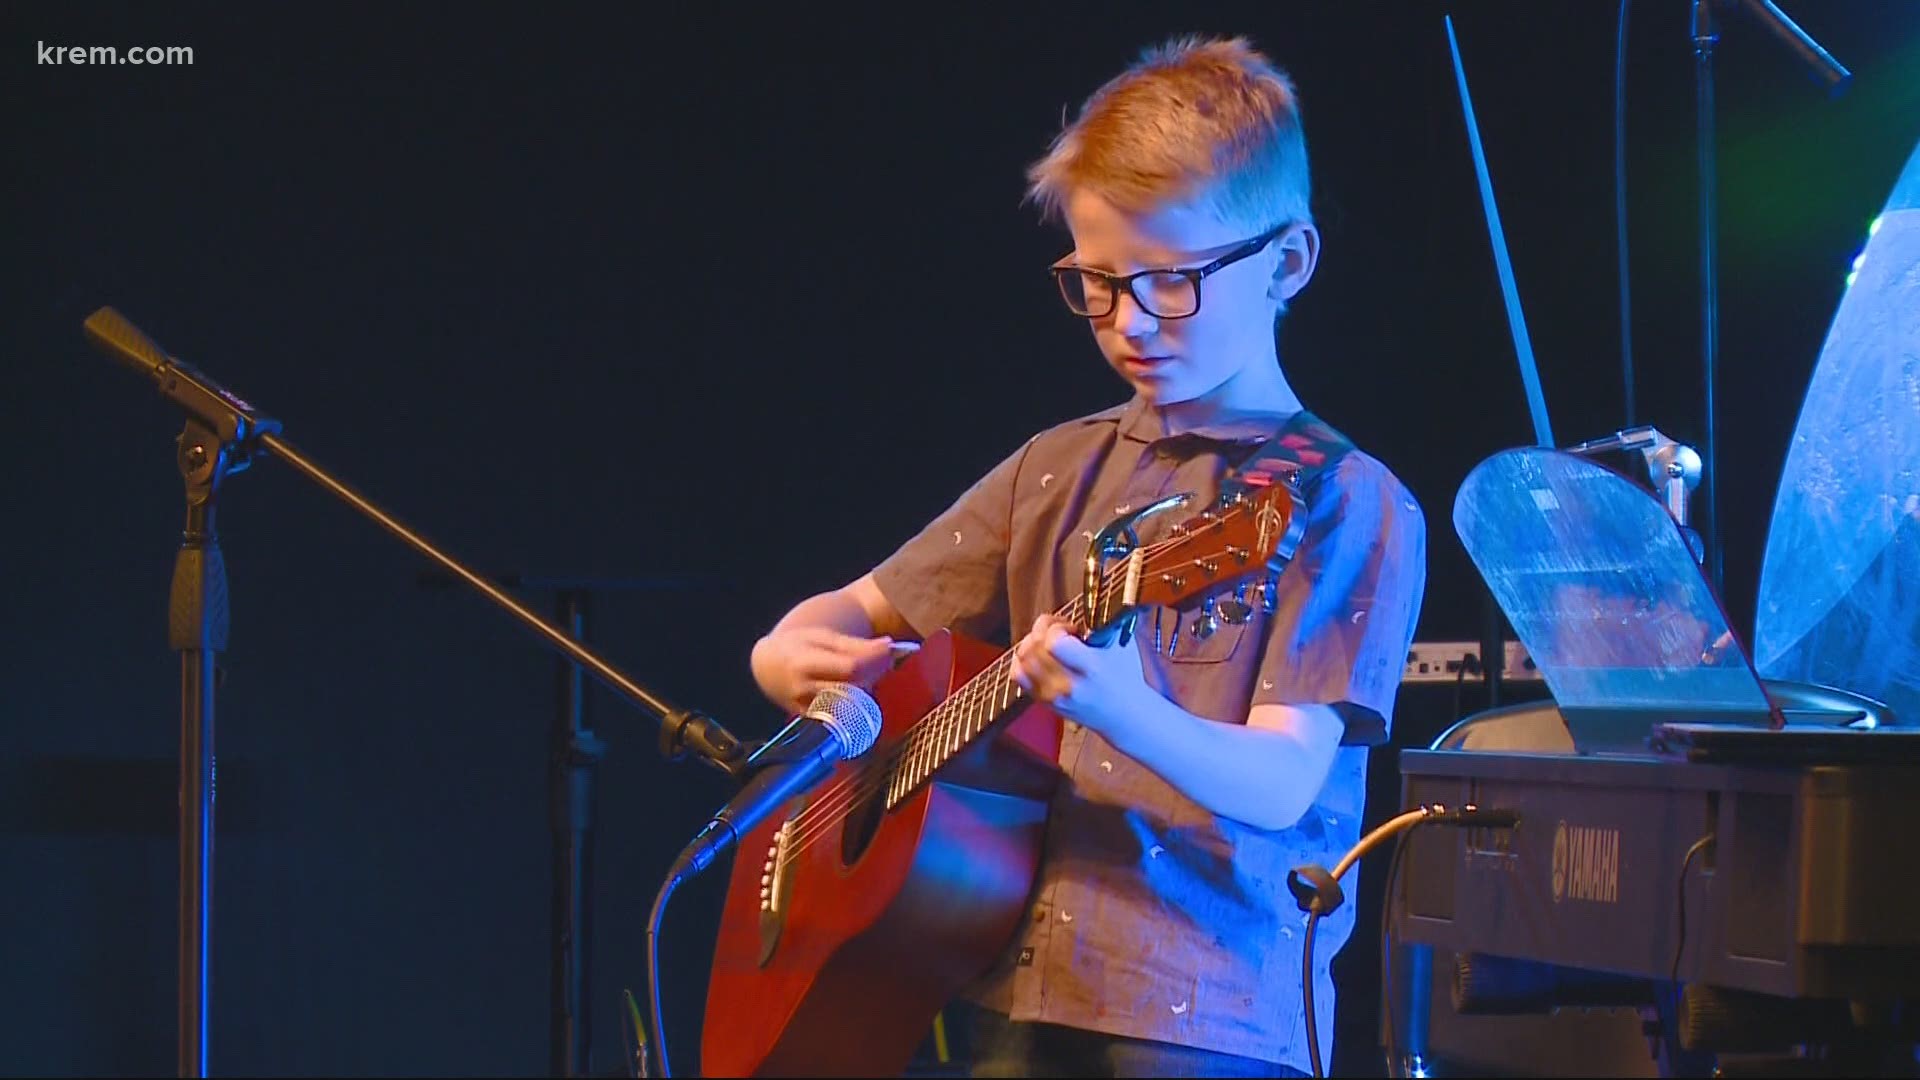 The North Idaho Rock School offers lesson in everything from guitar and drums to piano and voice.